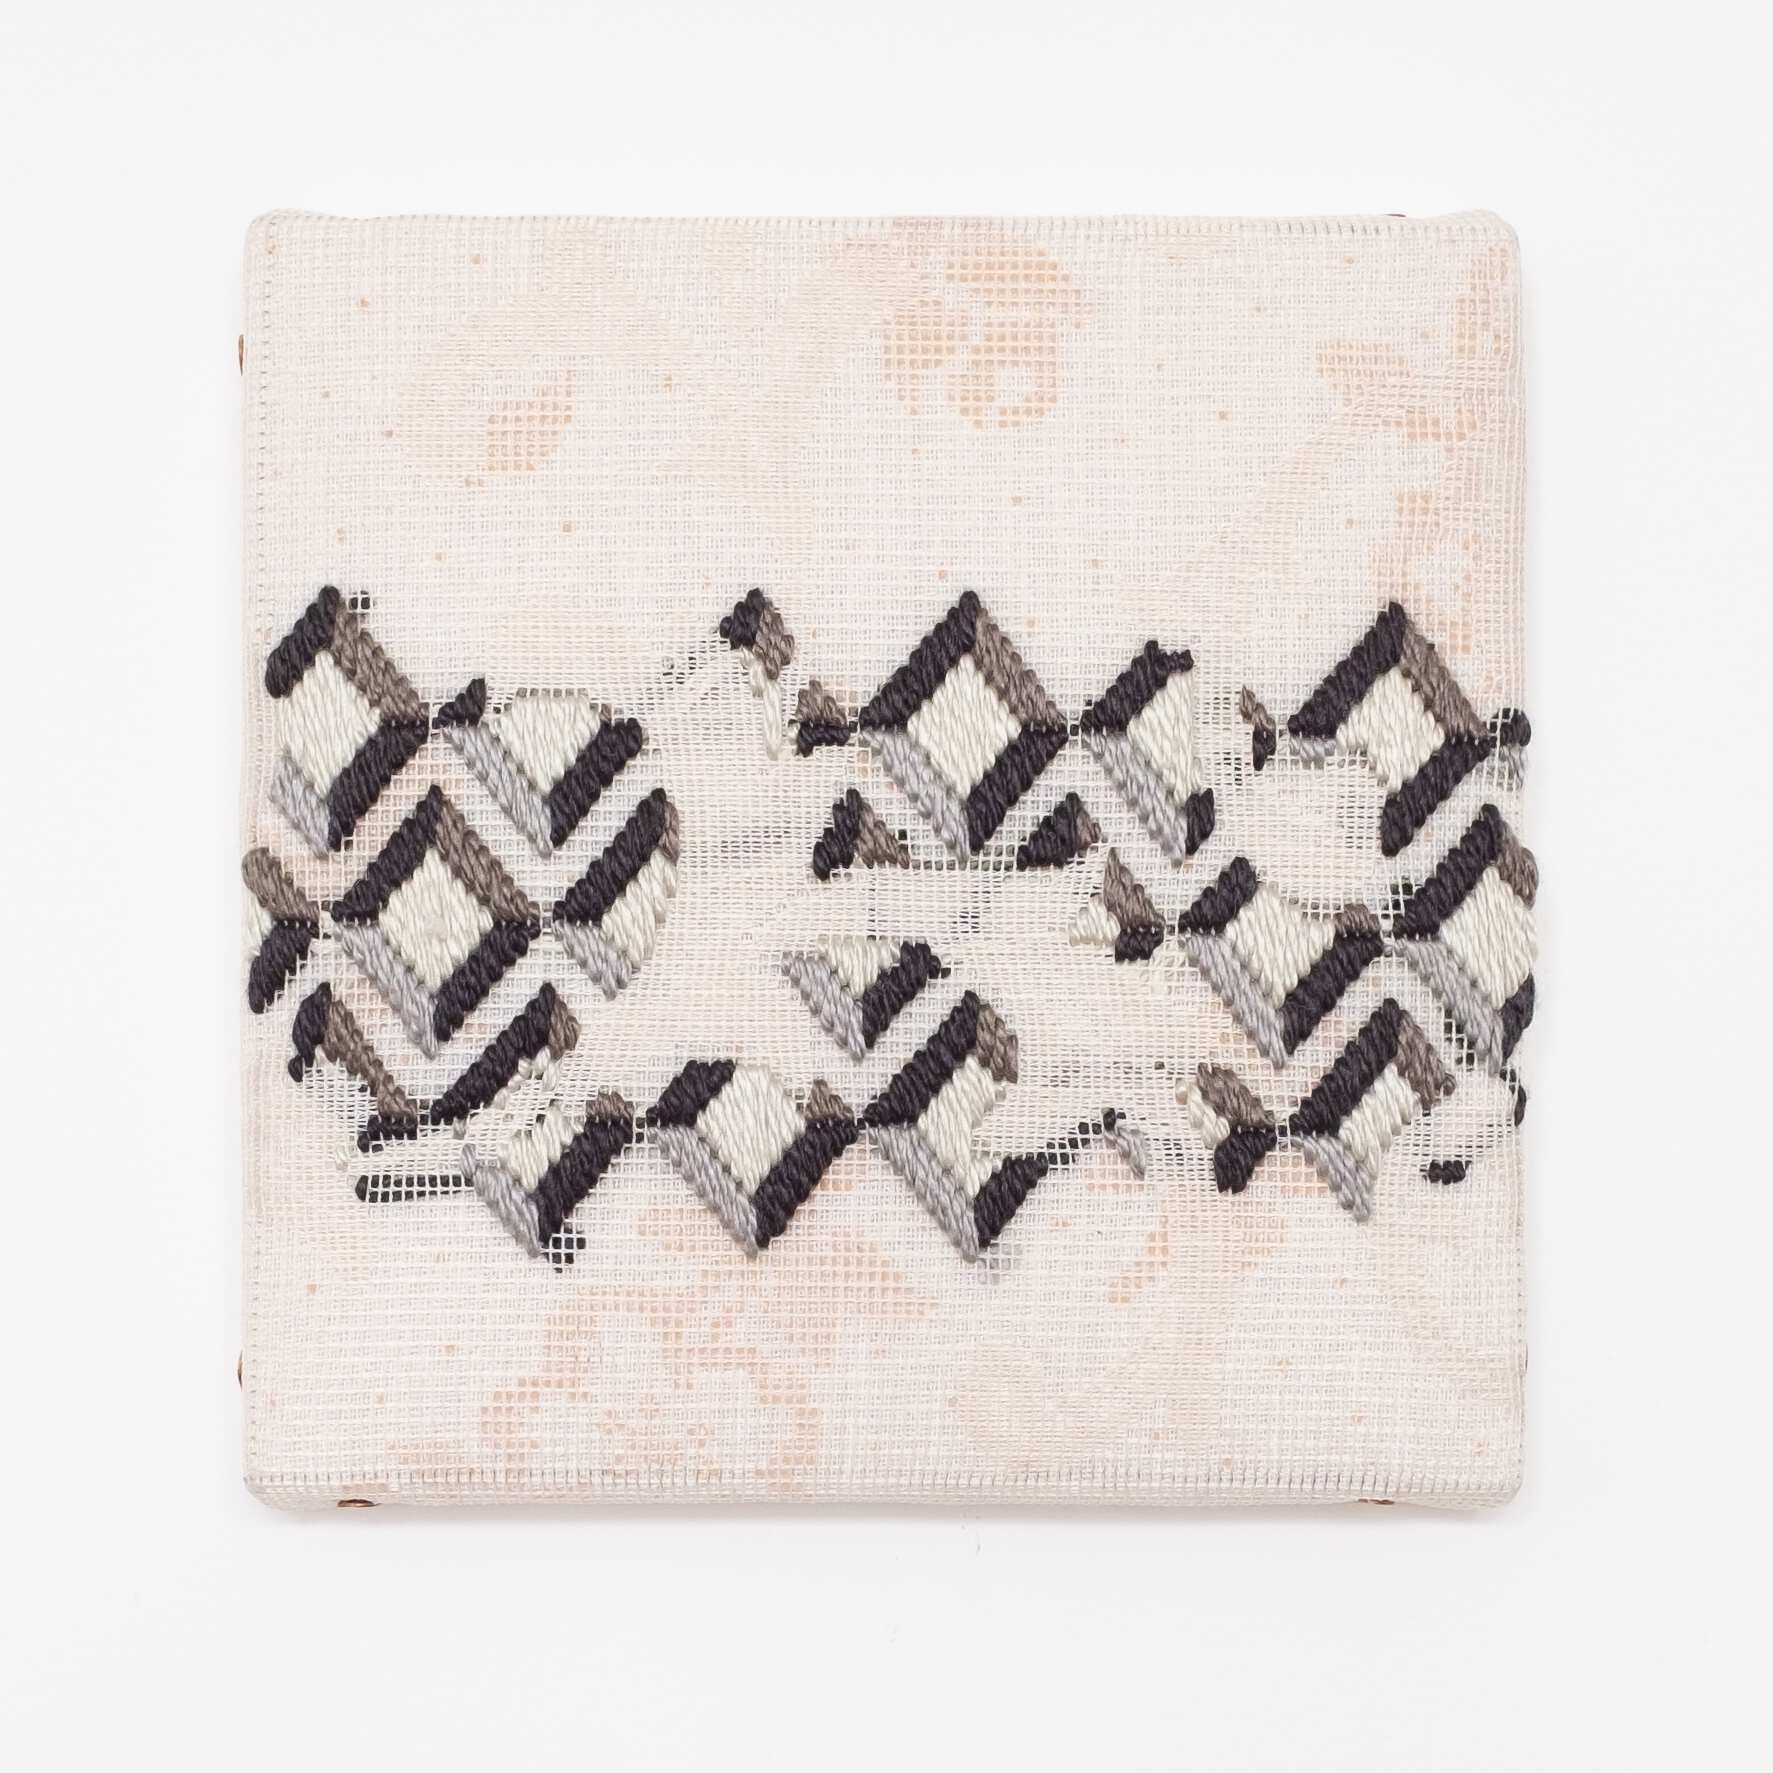 Triple-layer gather-gusset [grey diamonds], Hand-embroidered silk on lace over fabric, 2019